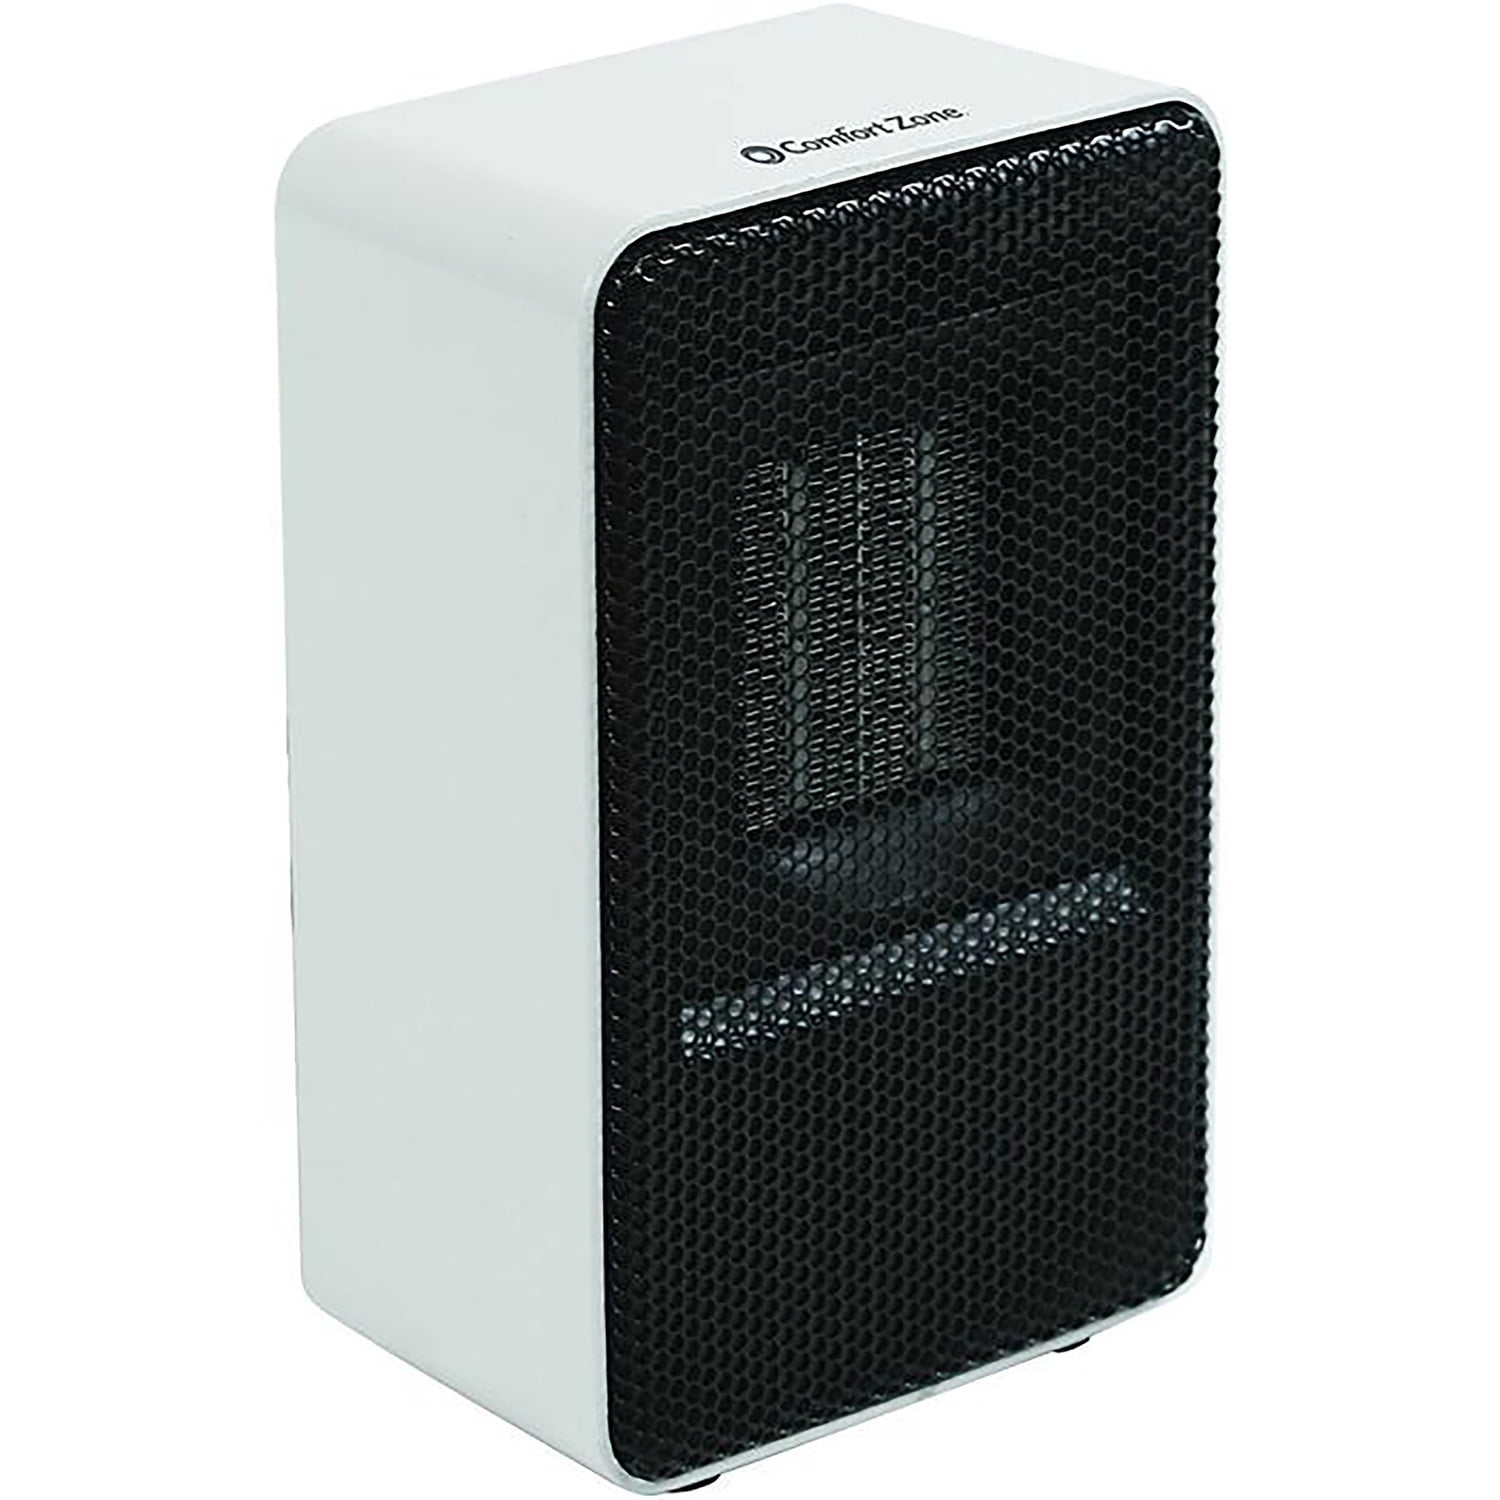 Cz410wt 250 In. Personal Electric Ceramic Heater, White - Small